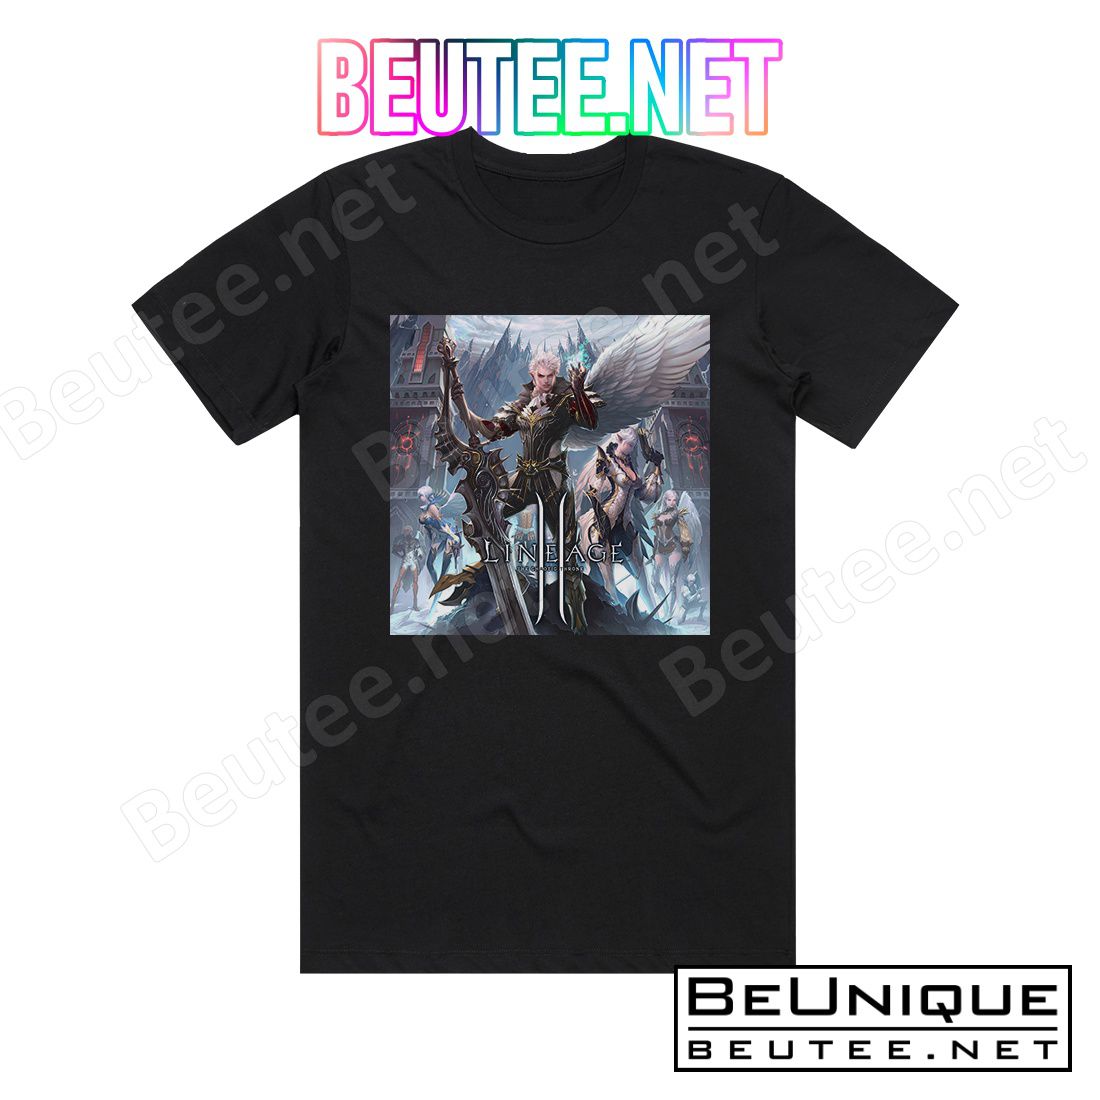 Bill Brown Lineage Ii The Chaotic Throne Album Cover T-Shirt